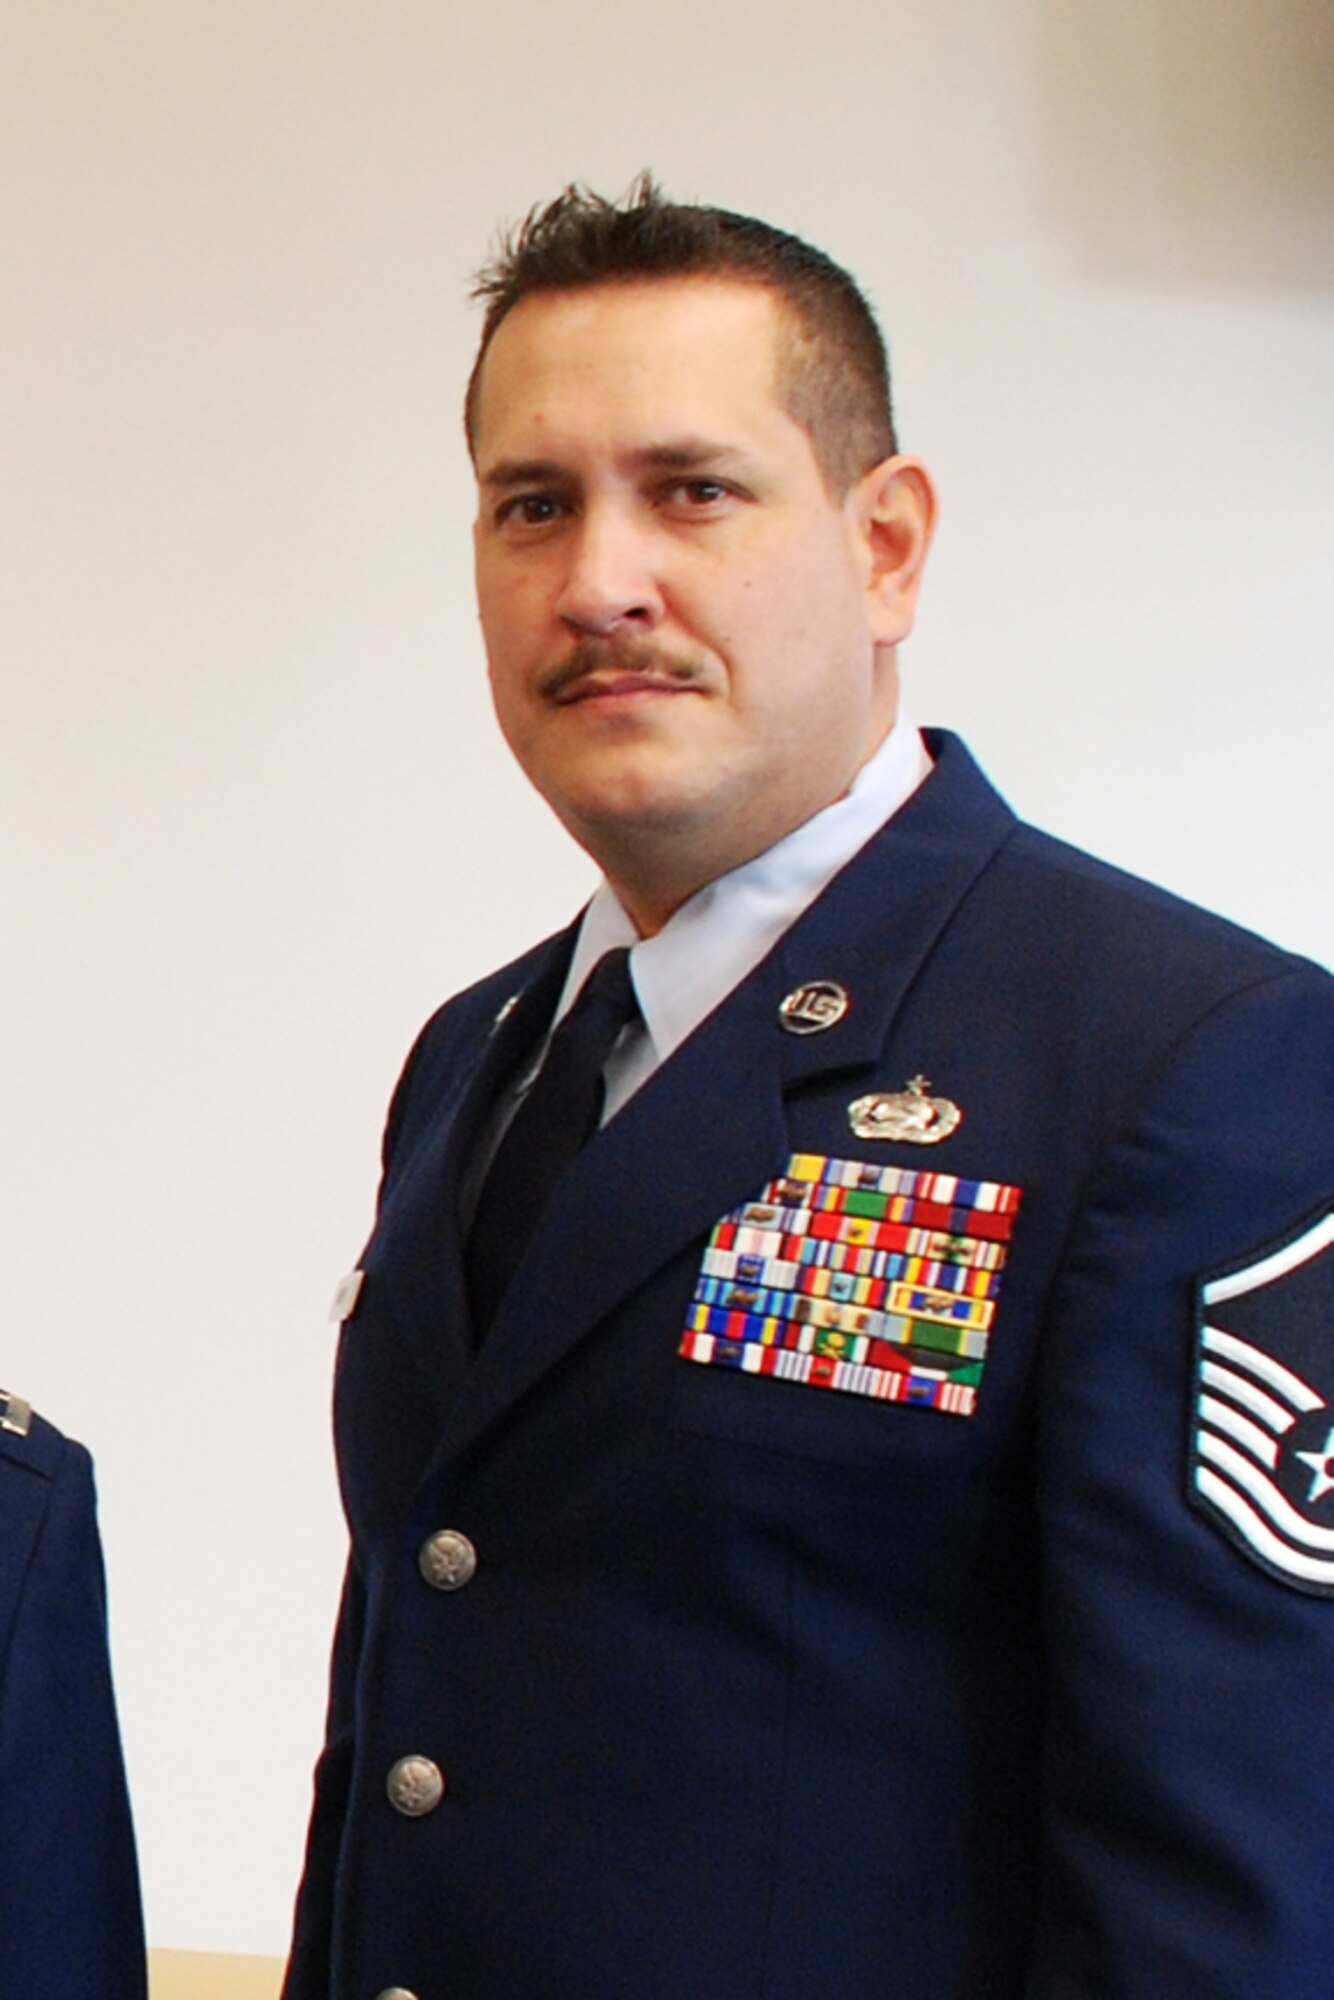 Master Sgt. Gary Hayner of the 139th Logistics Readiness Squadron, as he was recently named the Missouri Air National Guard?s Senior NCO of the Year. (U.S. Air Force photo by Staff Sgt. Michael Crane) (RELEASED)